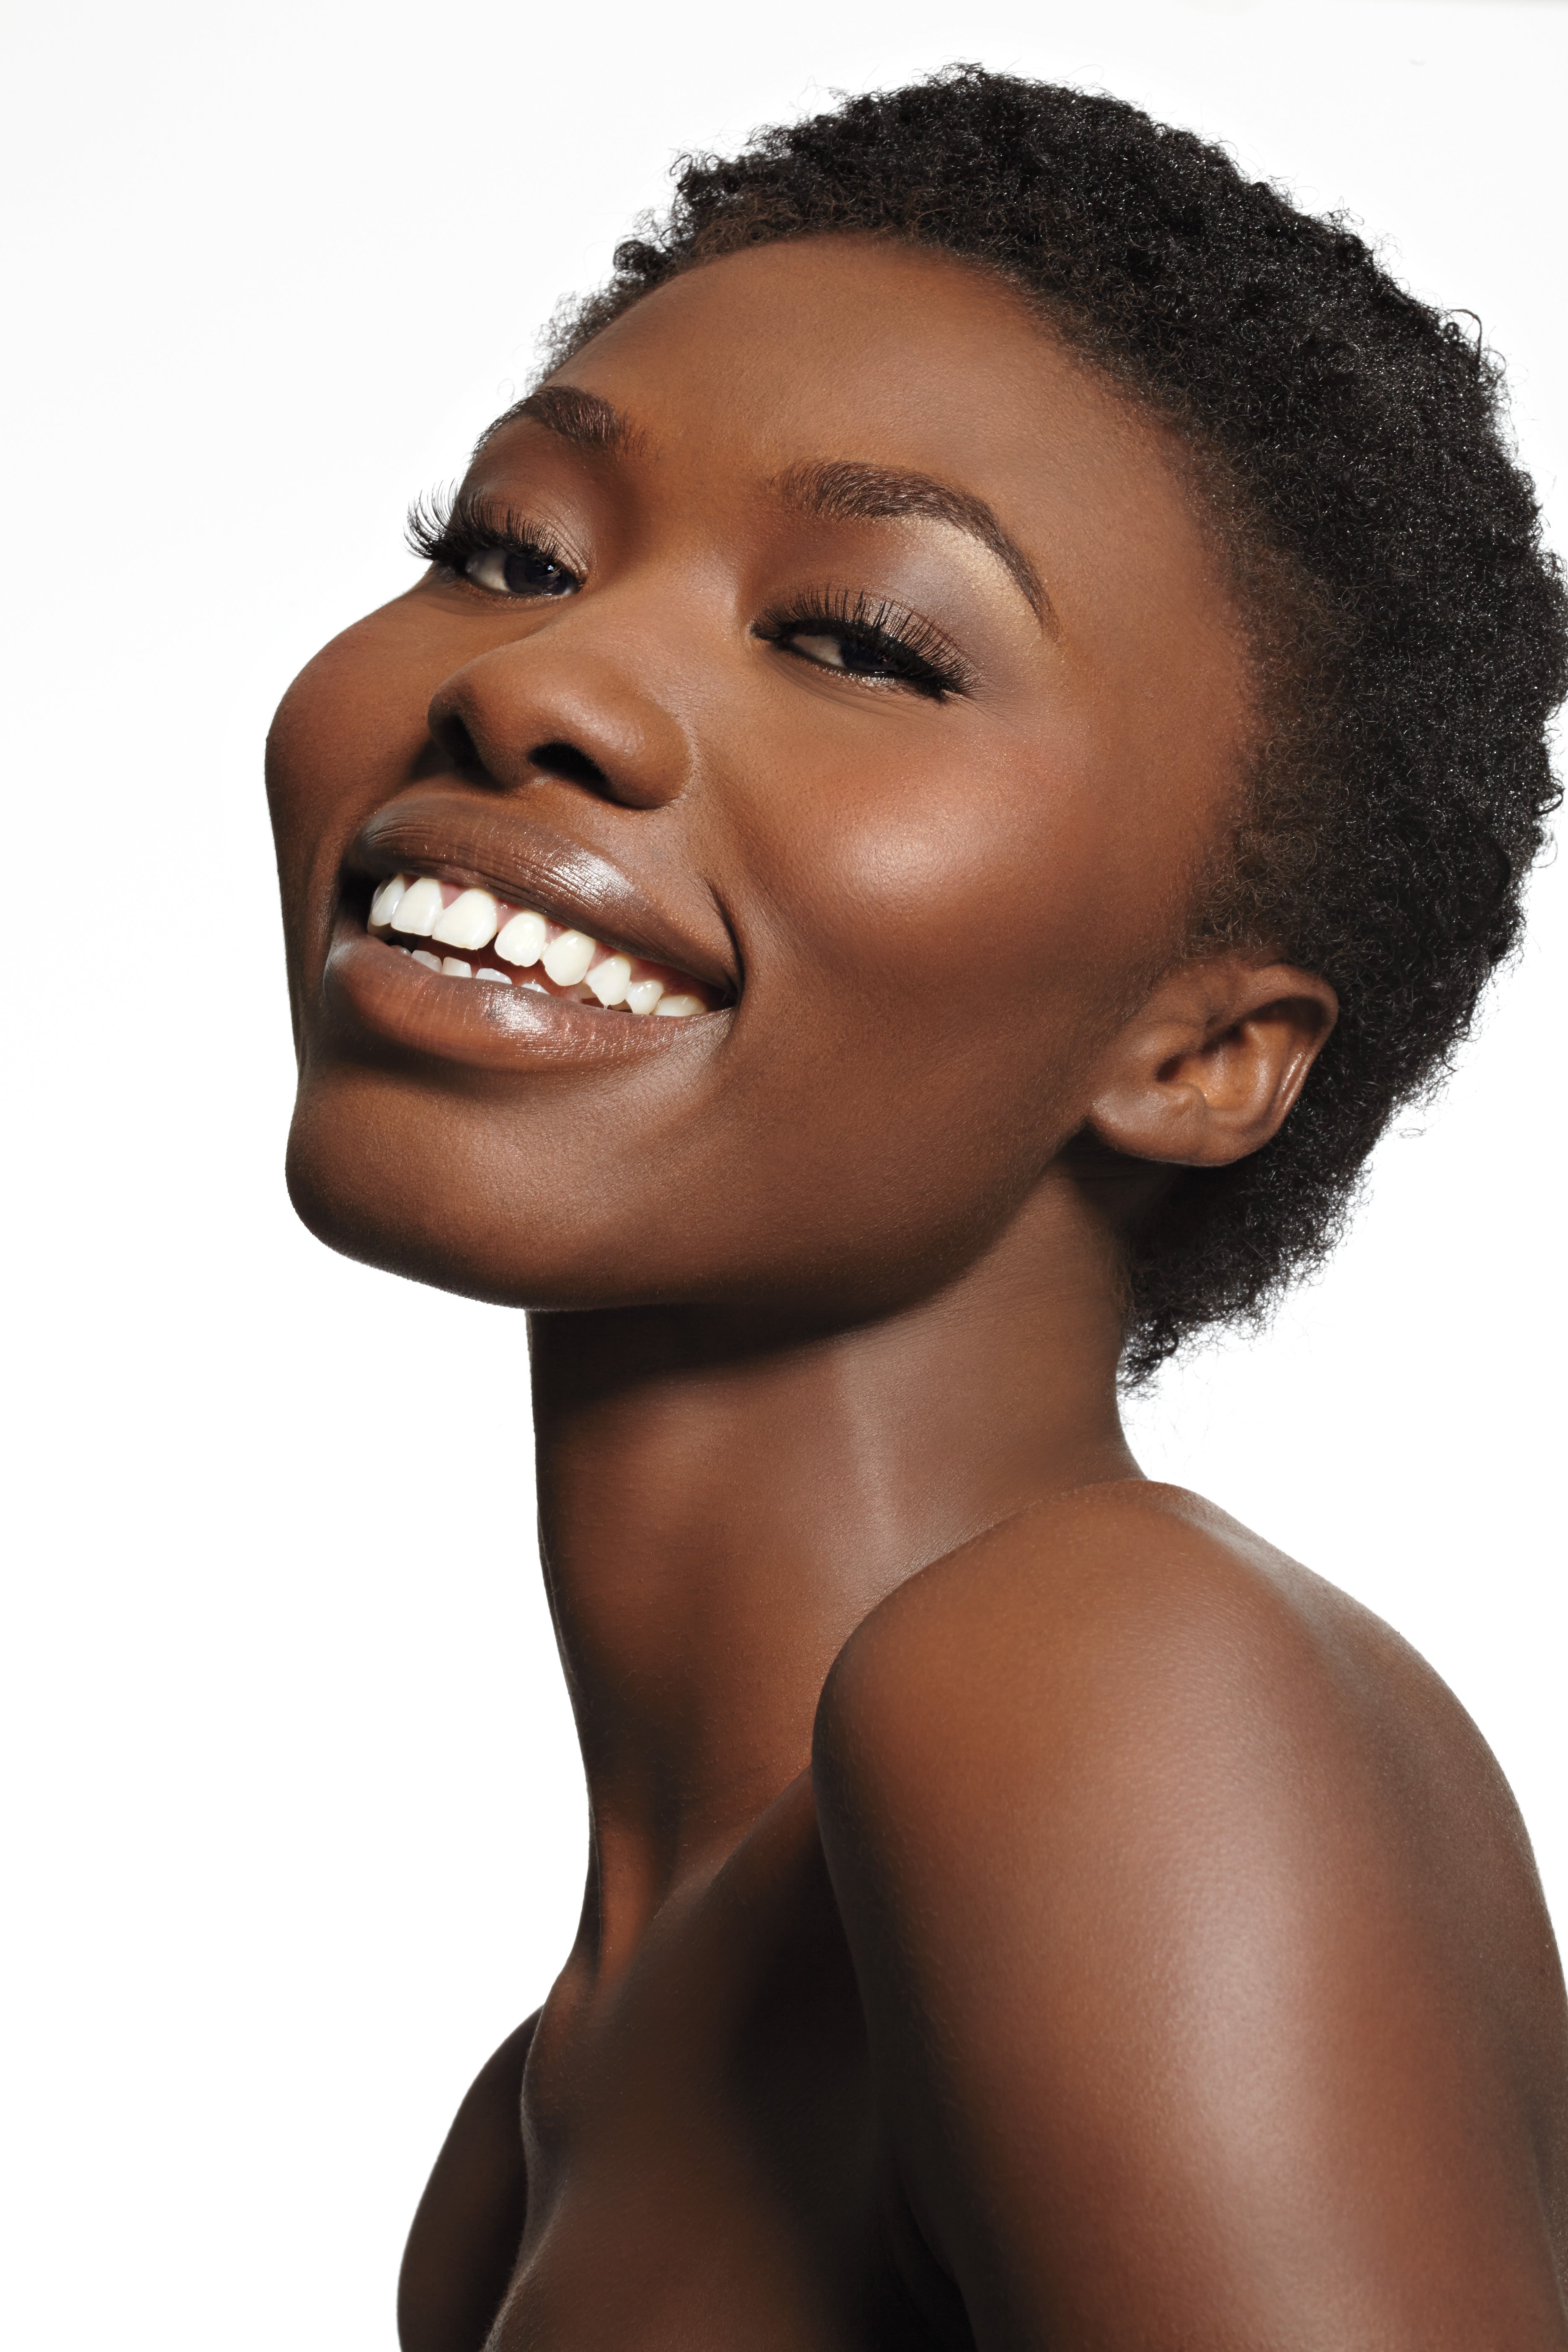 Check Out ESSENCE.com's New Beauty Channel for Tips to Get Glowing Skin In Your 20s, 30s, 40s & Beyond!